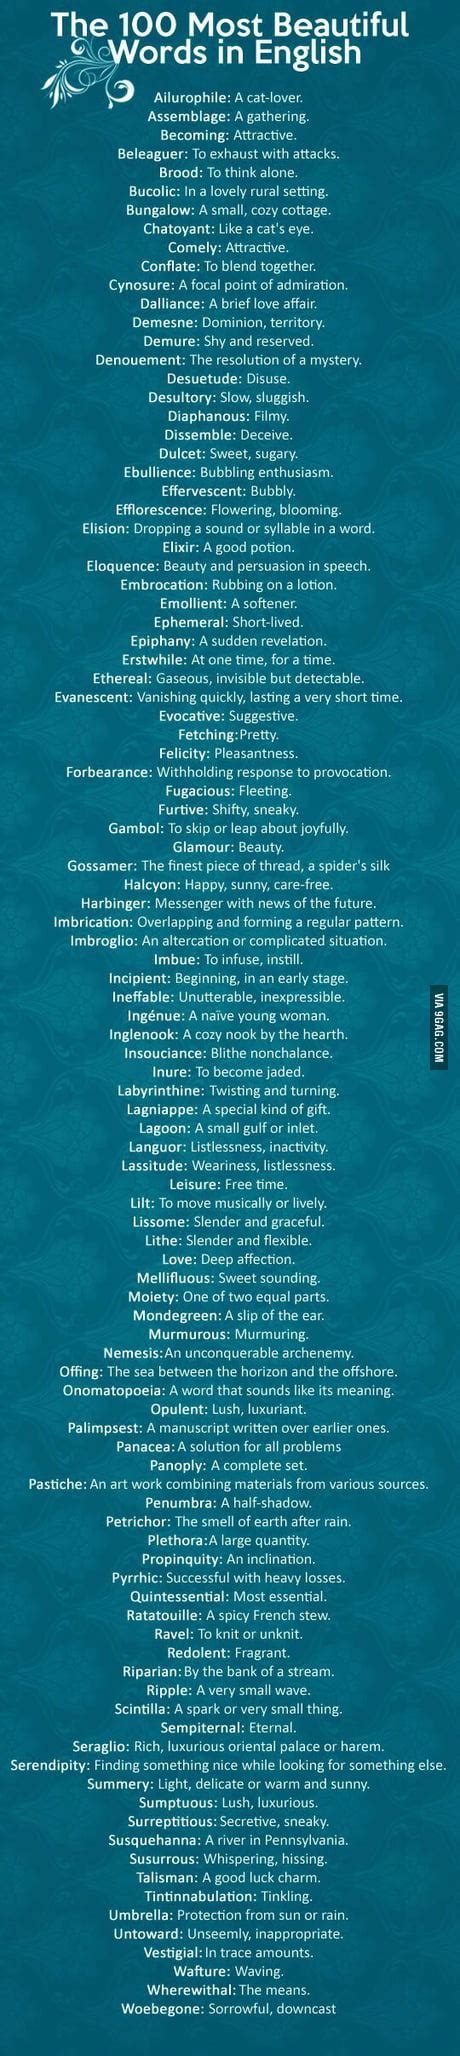 100 Most Beautiful Words In English Photos Idea